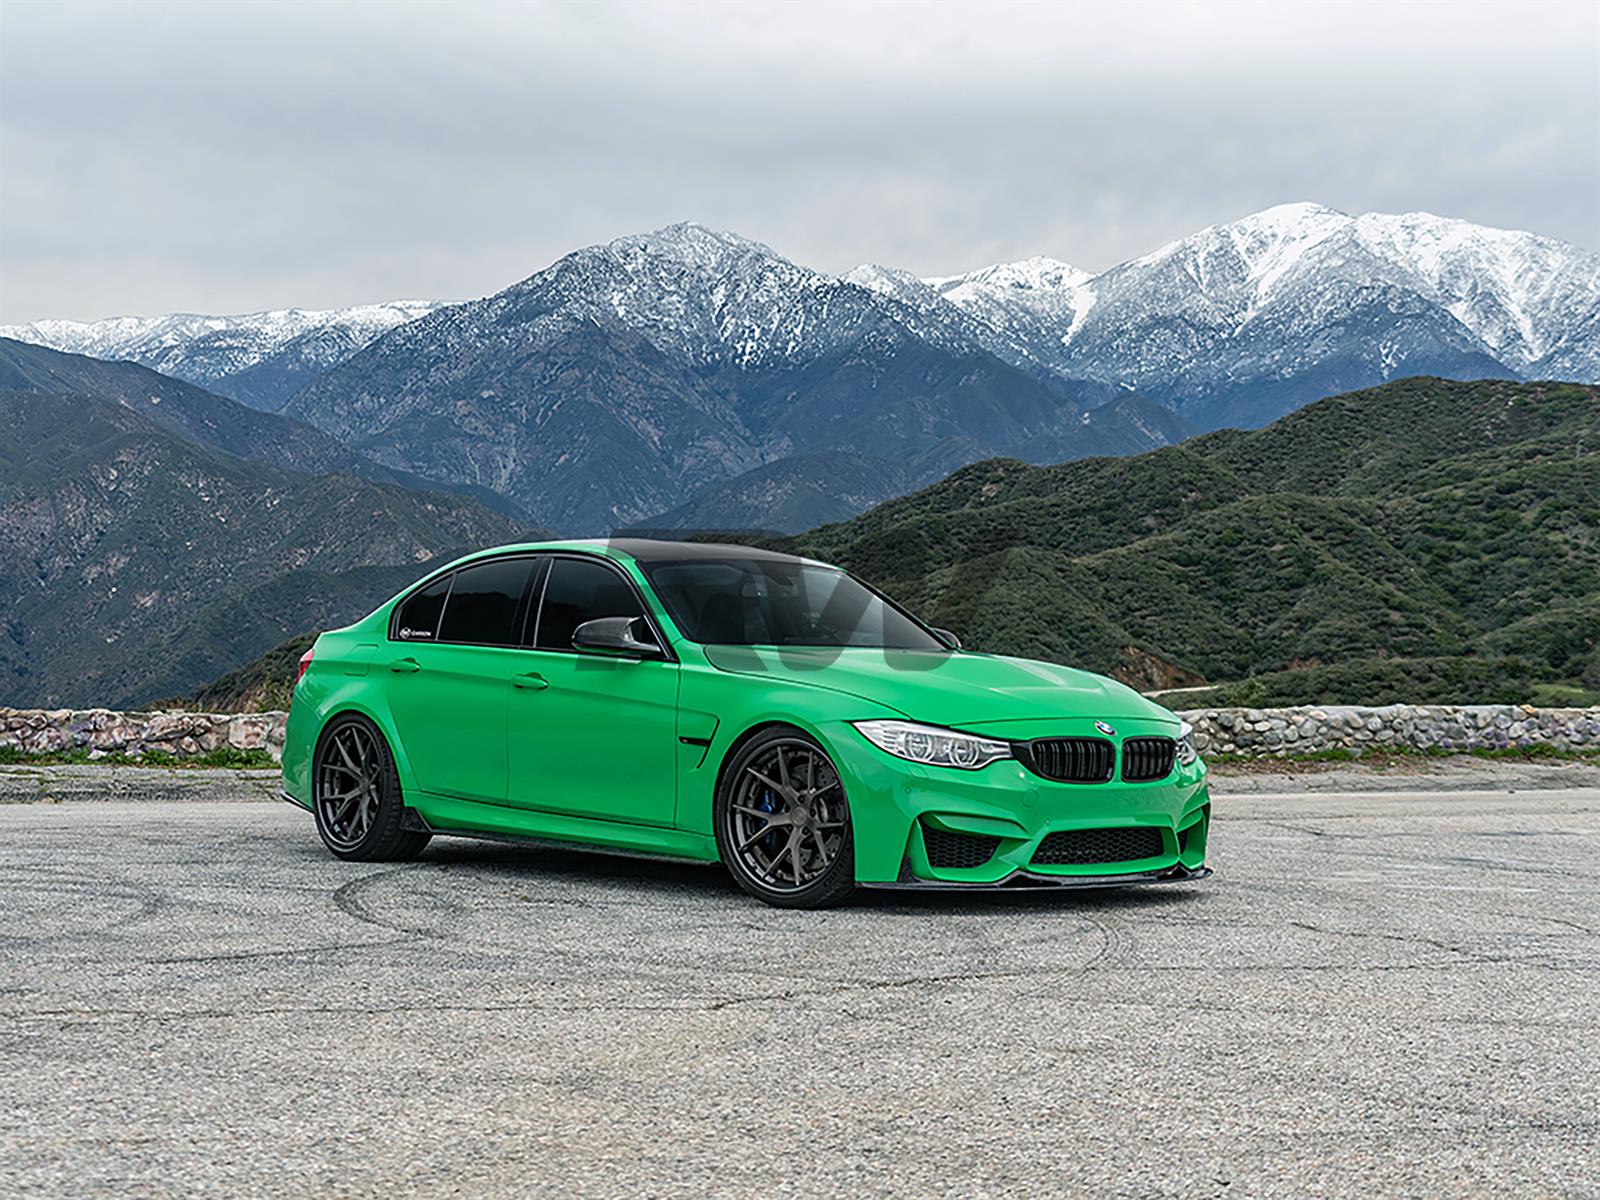 BMW F8x M3 M4 gets a new RWS Forged Carbon Front Lip